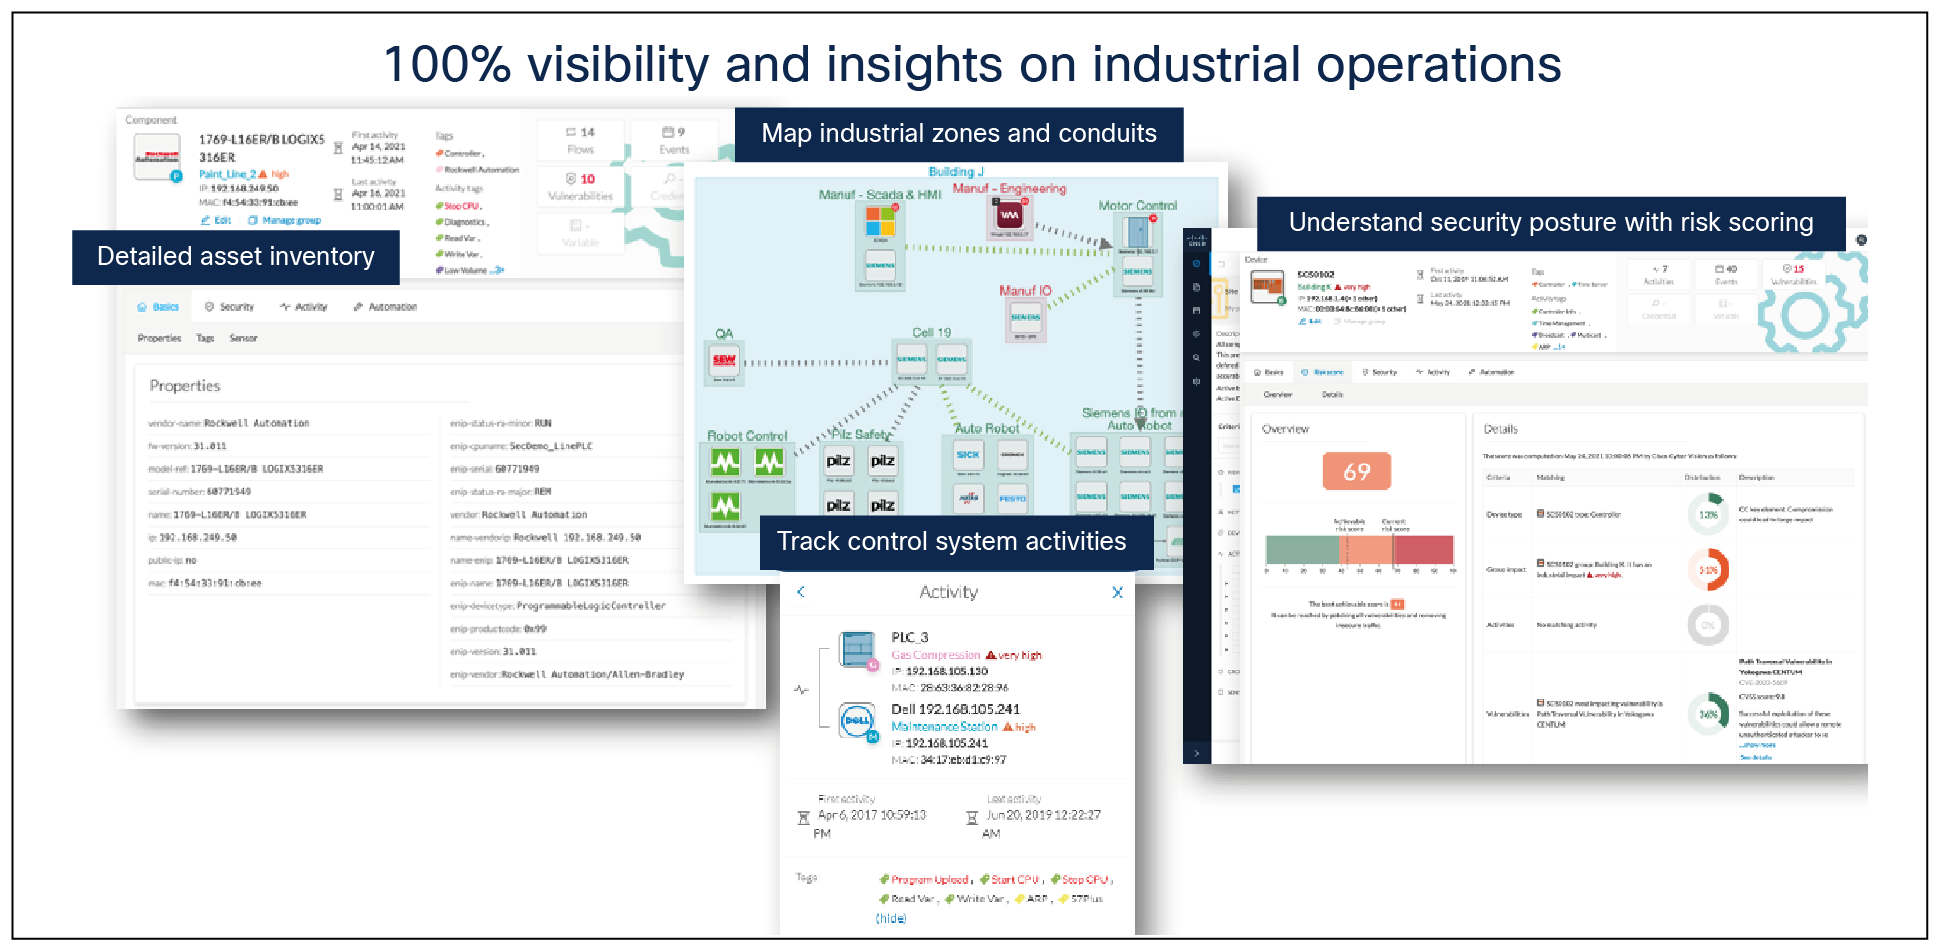 Gain operational insights into your assets, industrial processes, communication flows and your security posture